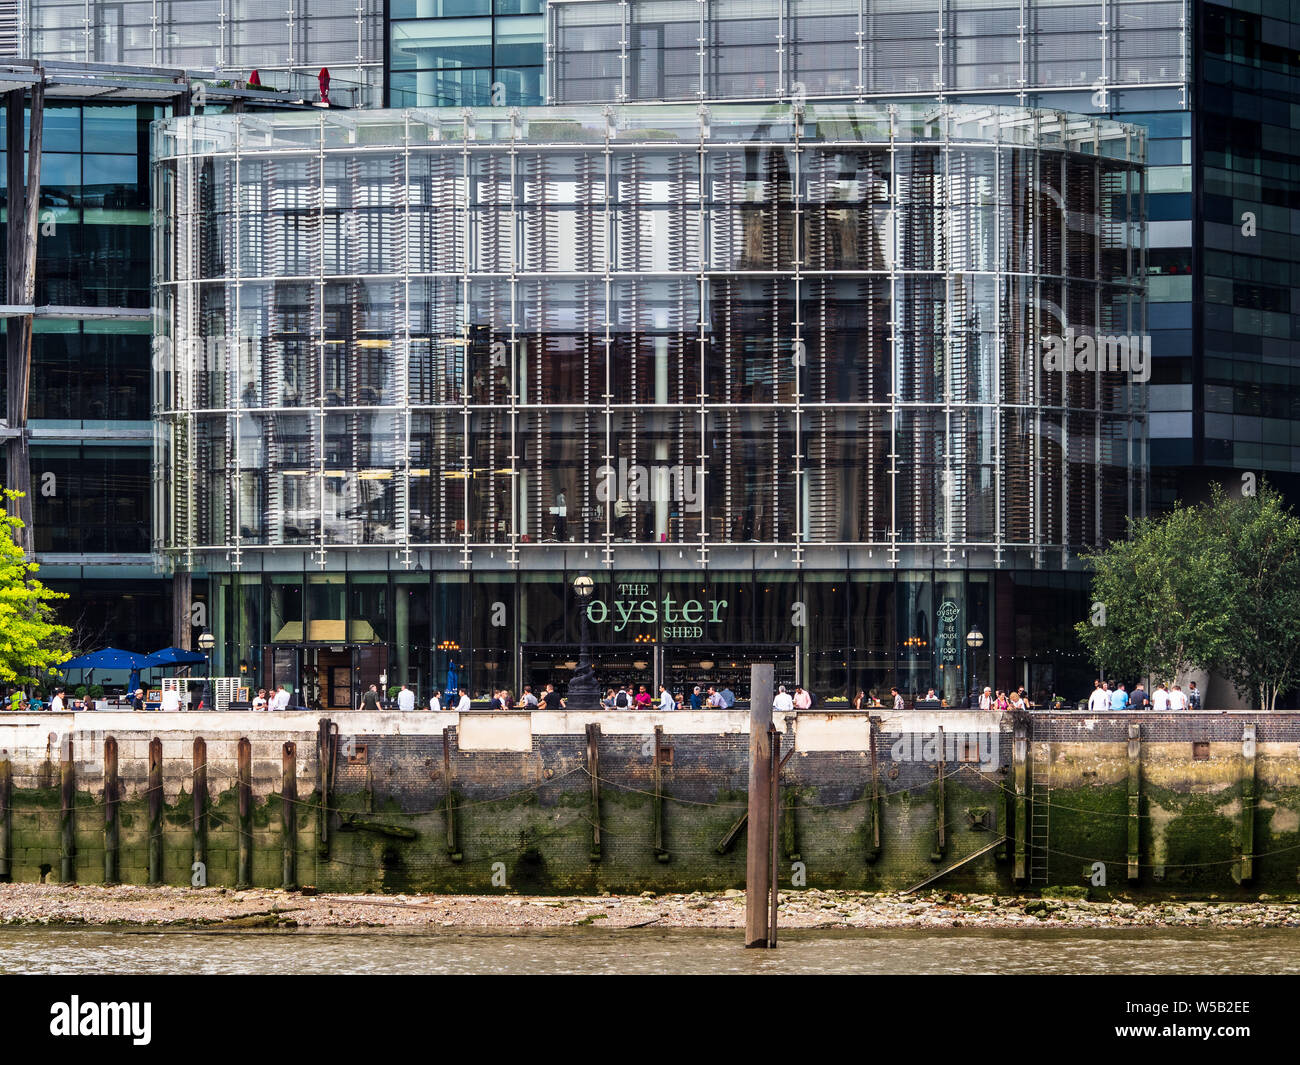 The Oyster Shed bar and restuarant on the banks of the River Thames in the City of London Financial District Stock Photo